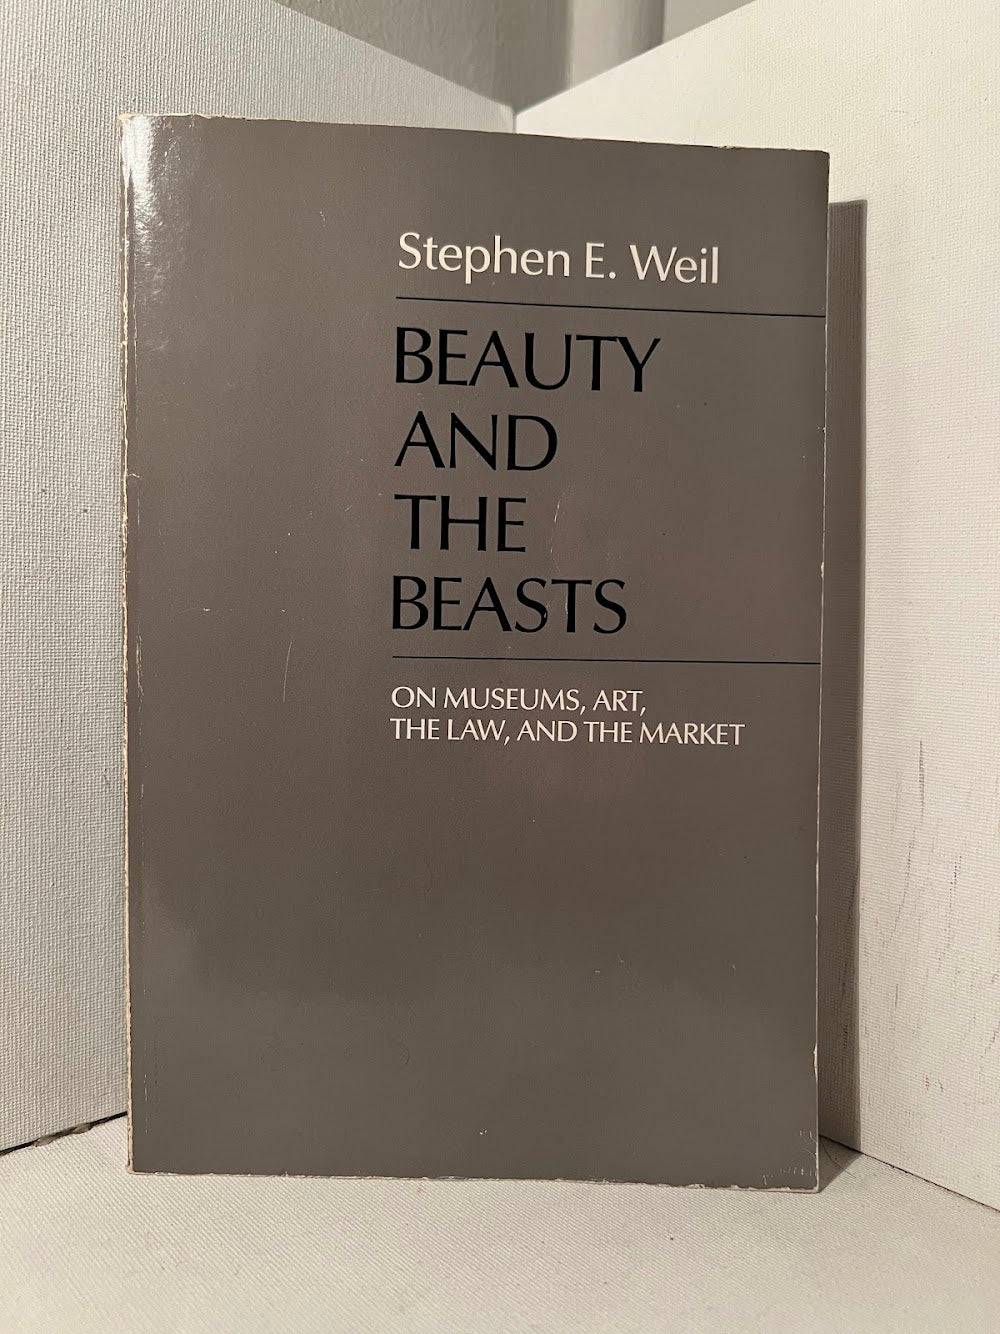 Beauty and the Beasts - On Museums, Art, The Law, and the Market by Stephen E. Weil